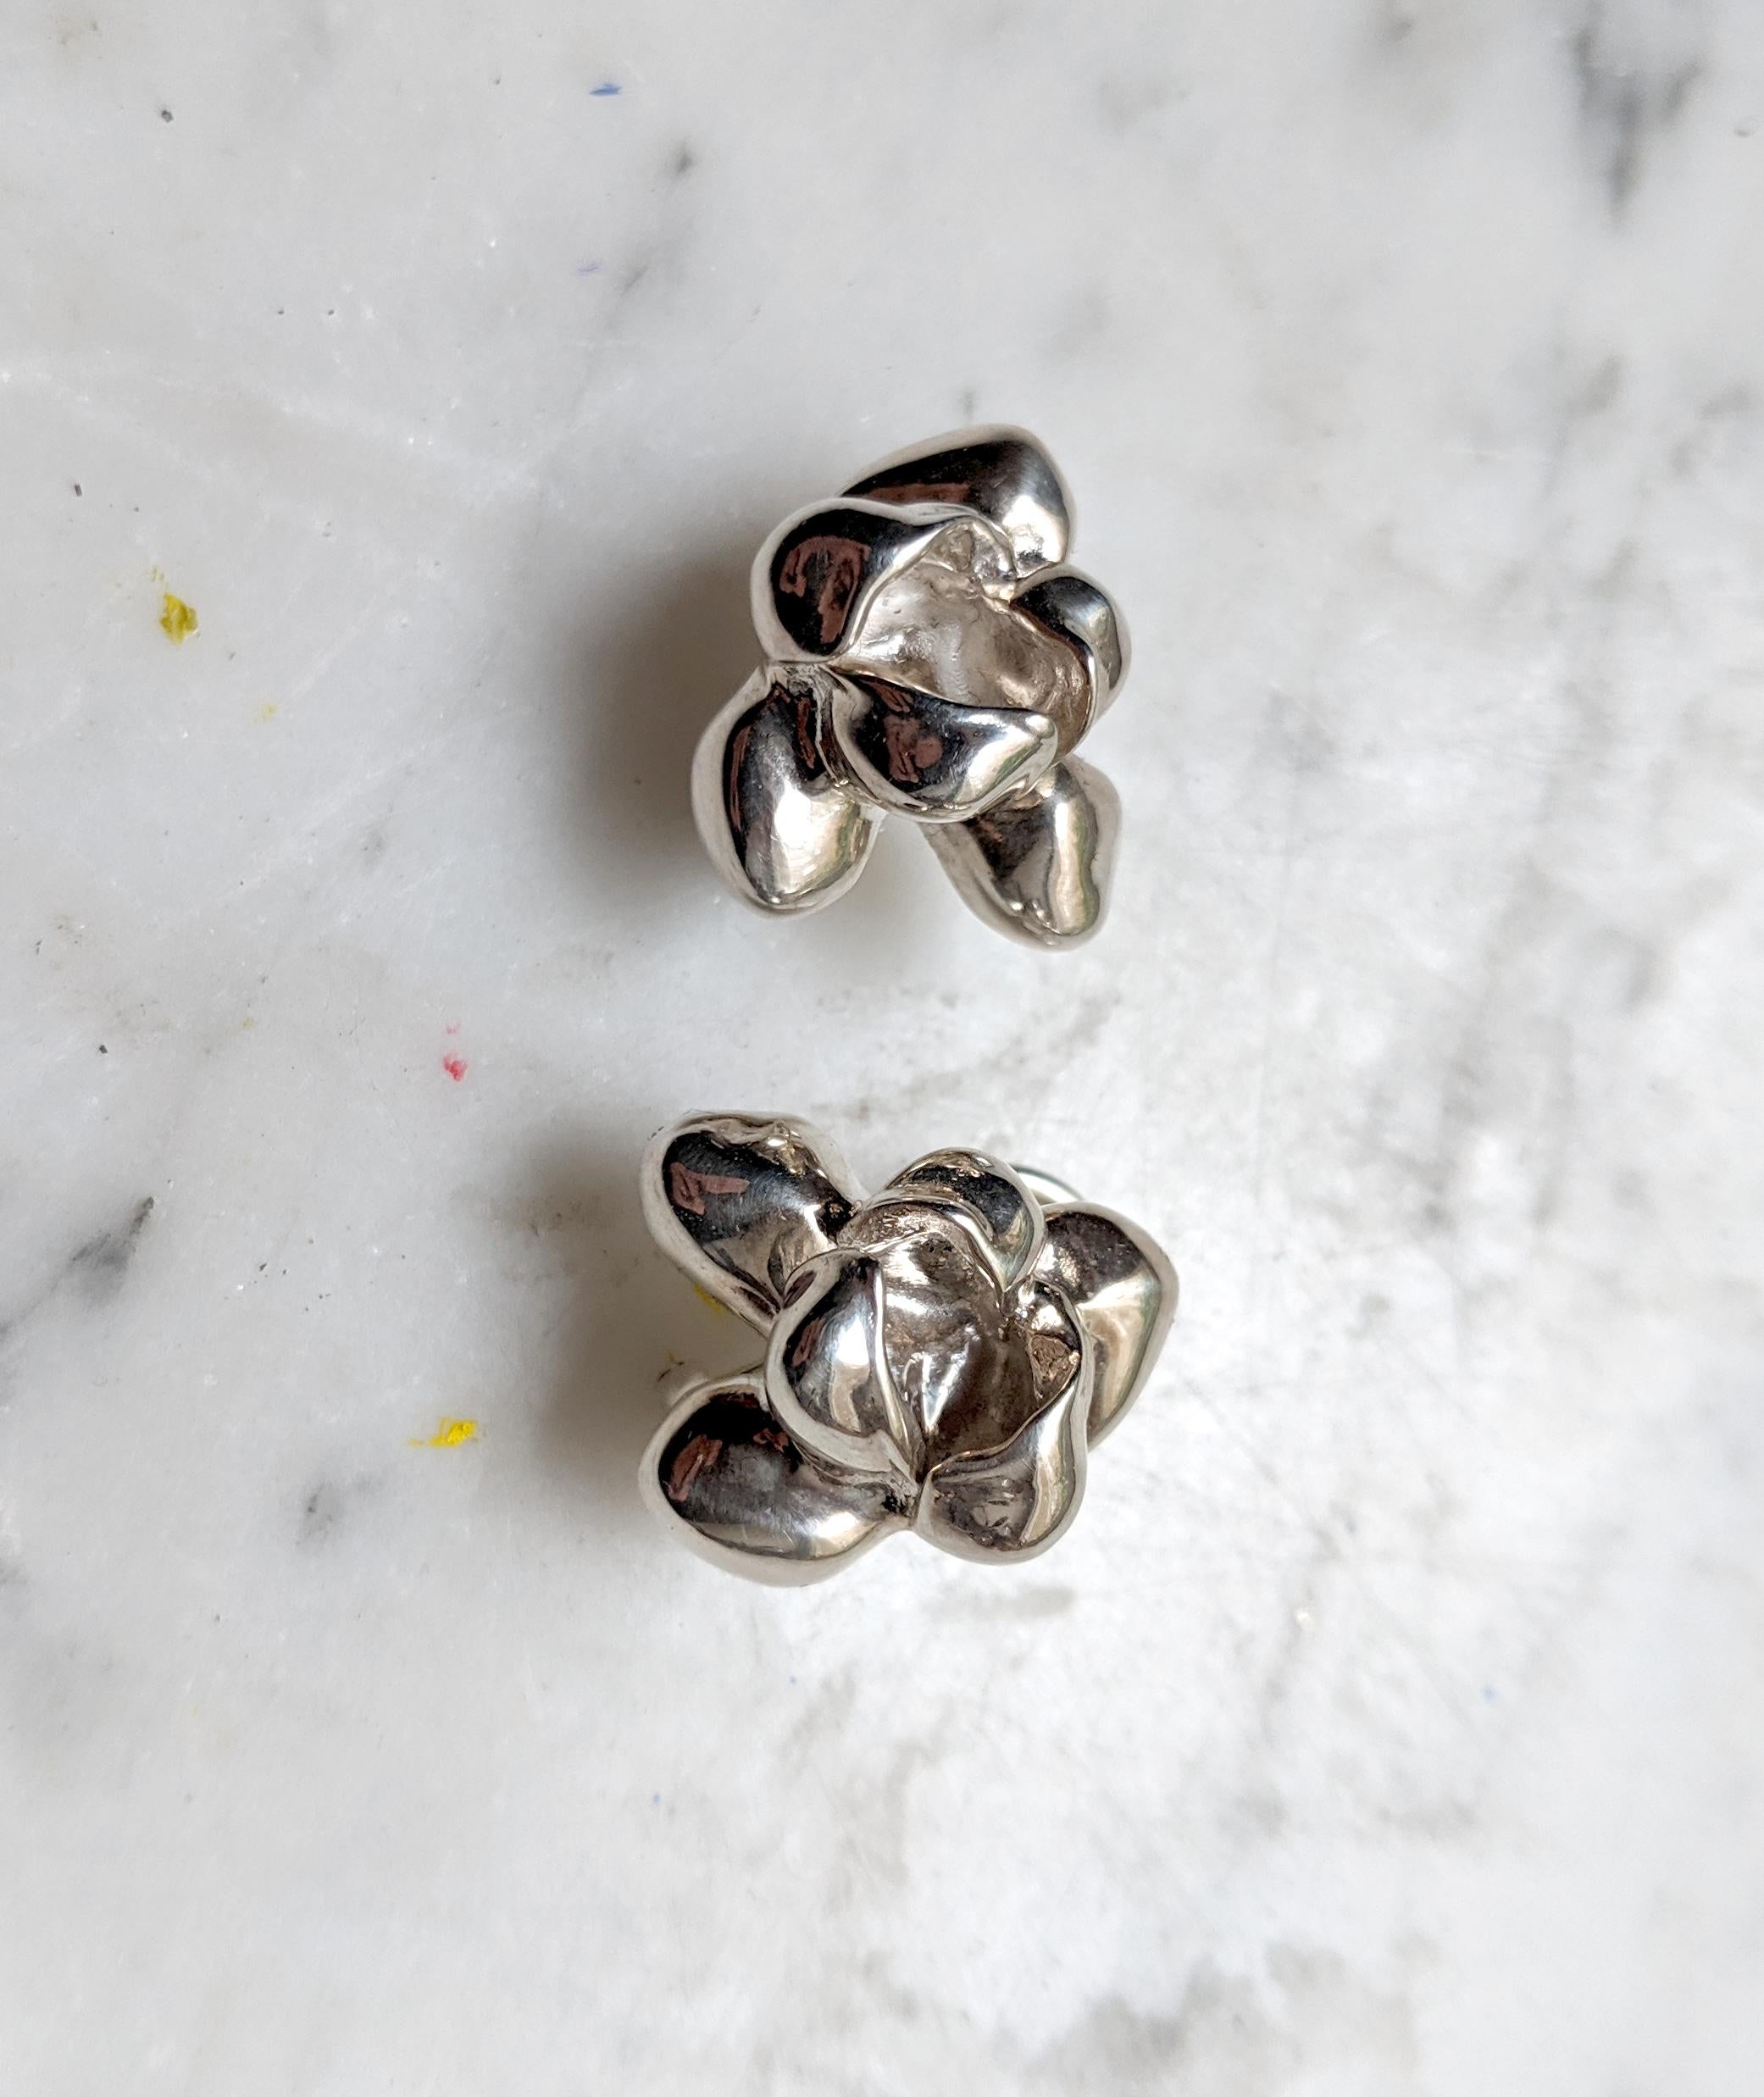 These Iris Blossom contemporary sculptural stud earrings were personally selected by the German actress Anne Ratte-Polle to complement her stage outfit when she received the Bavarian Film Award. The earrings feature a captivating sculptural design